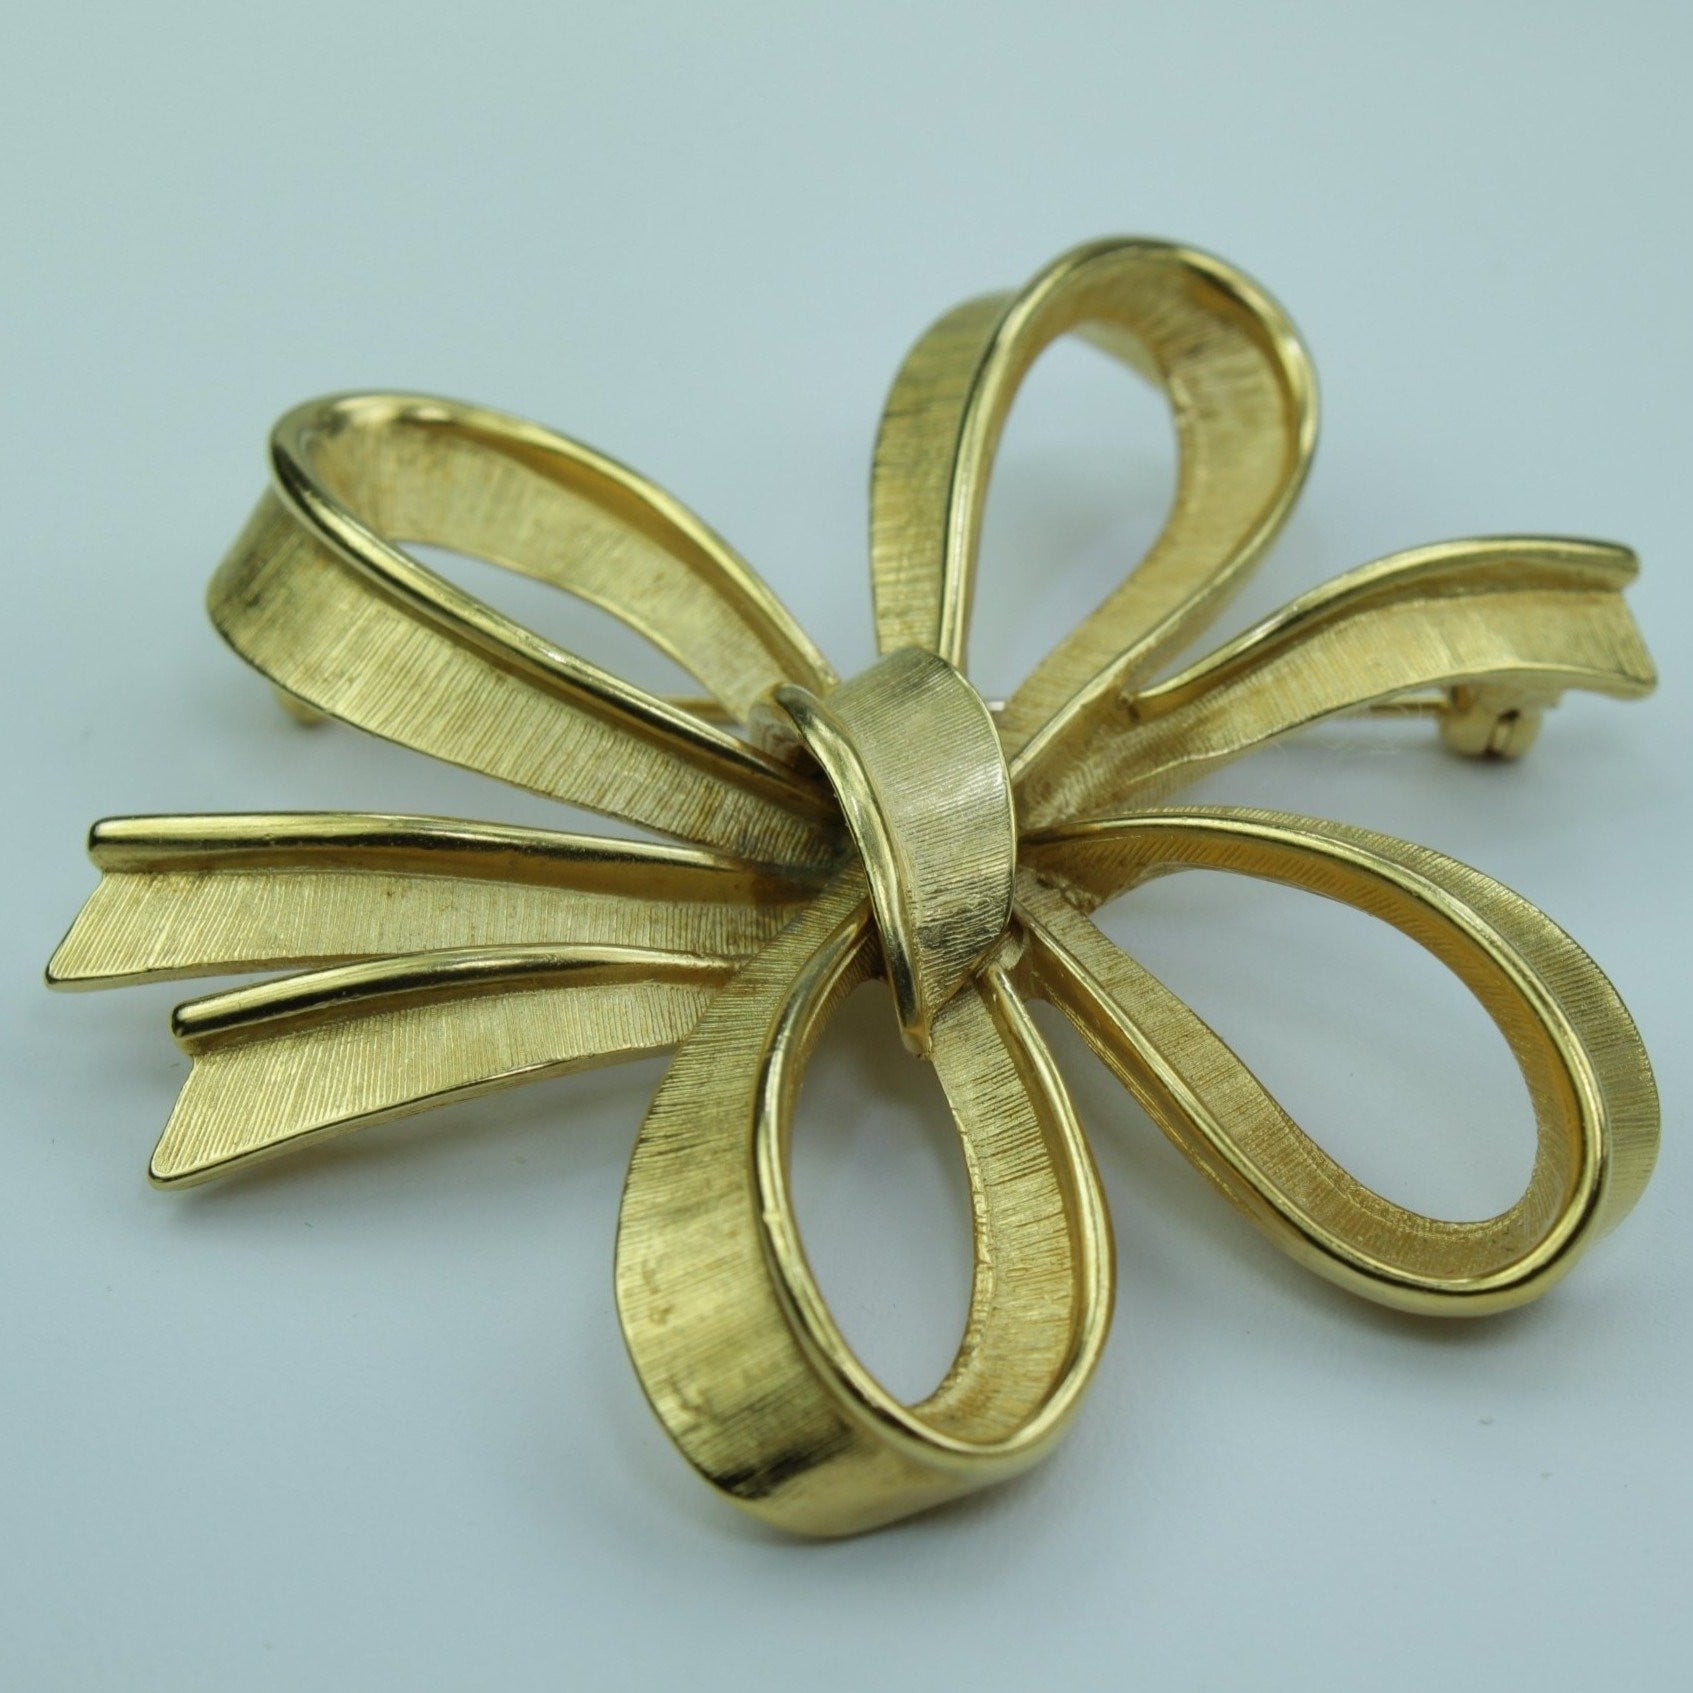 Vintage MONET Pin Gold Free Form Stylized Bow Mid Century